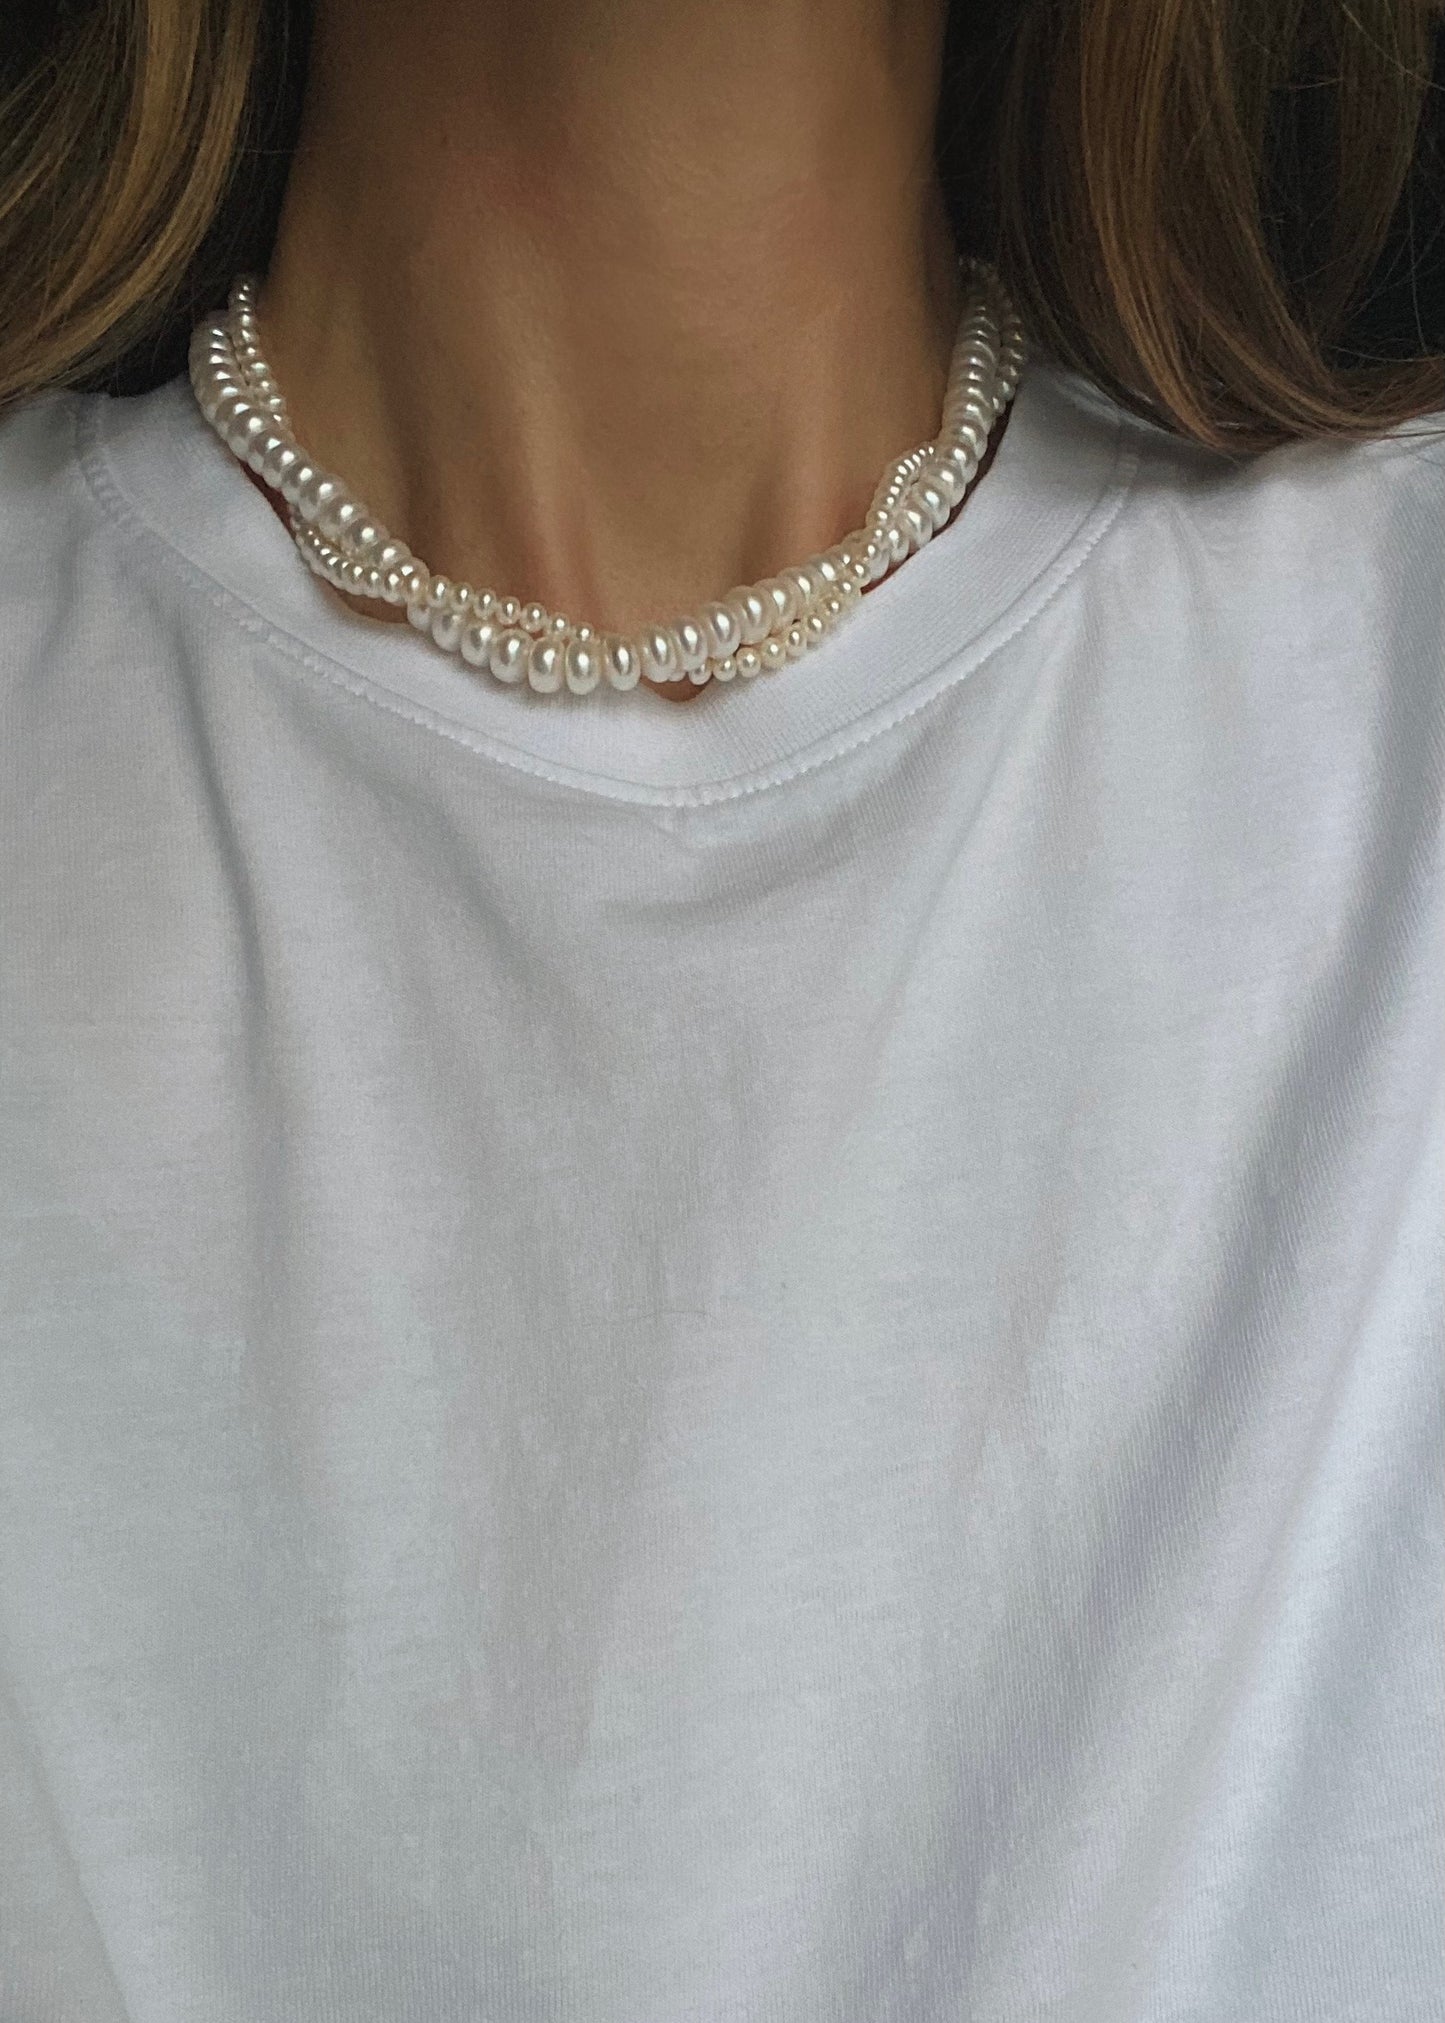 Wild love pearl necklace